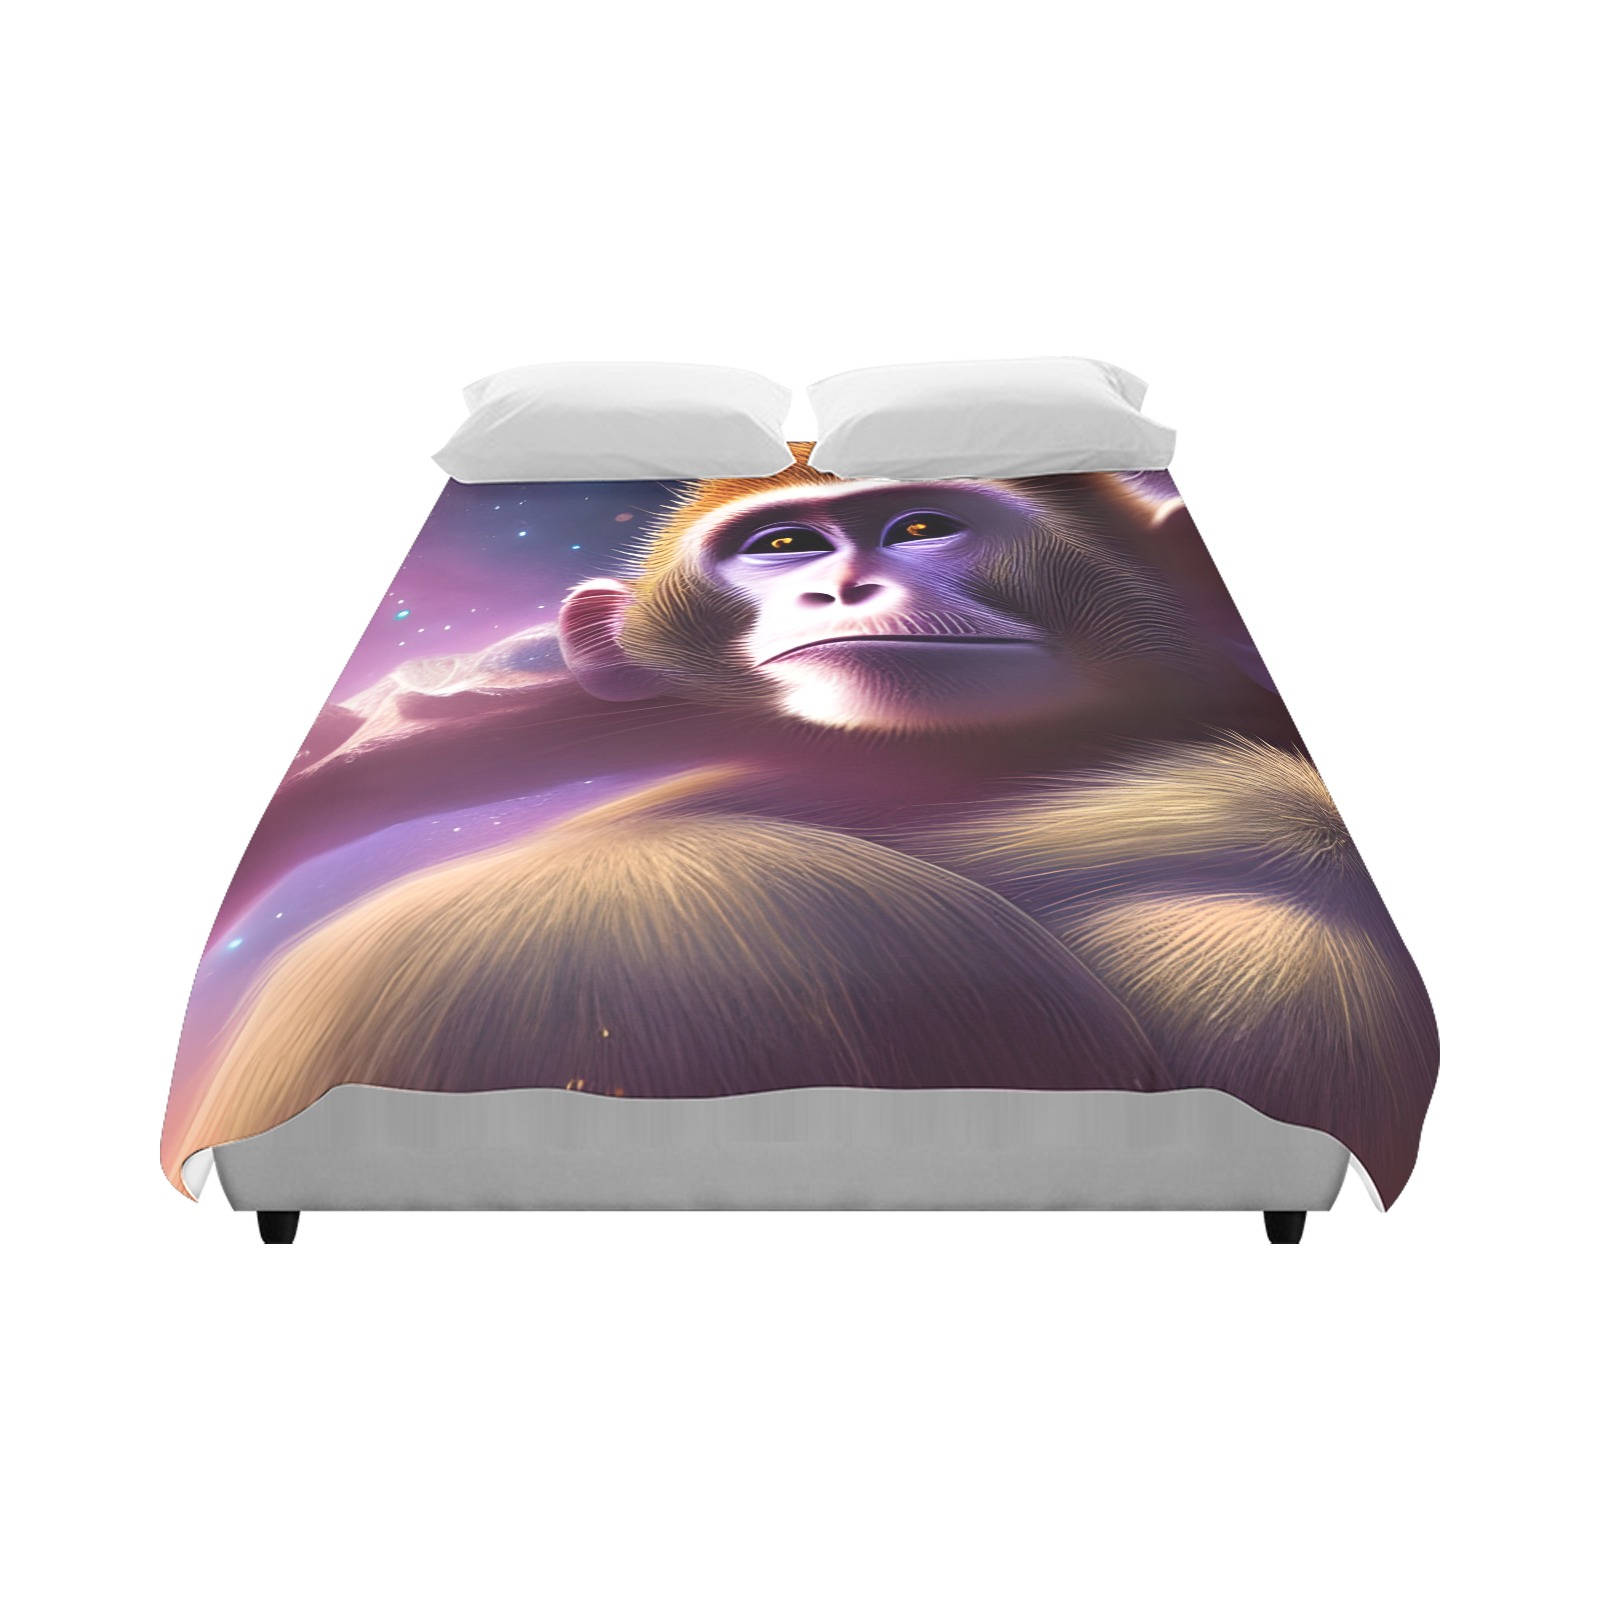 The Monkey (One) Duvet Cover 86"x70" ( All-over-print)